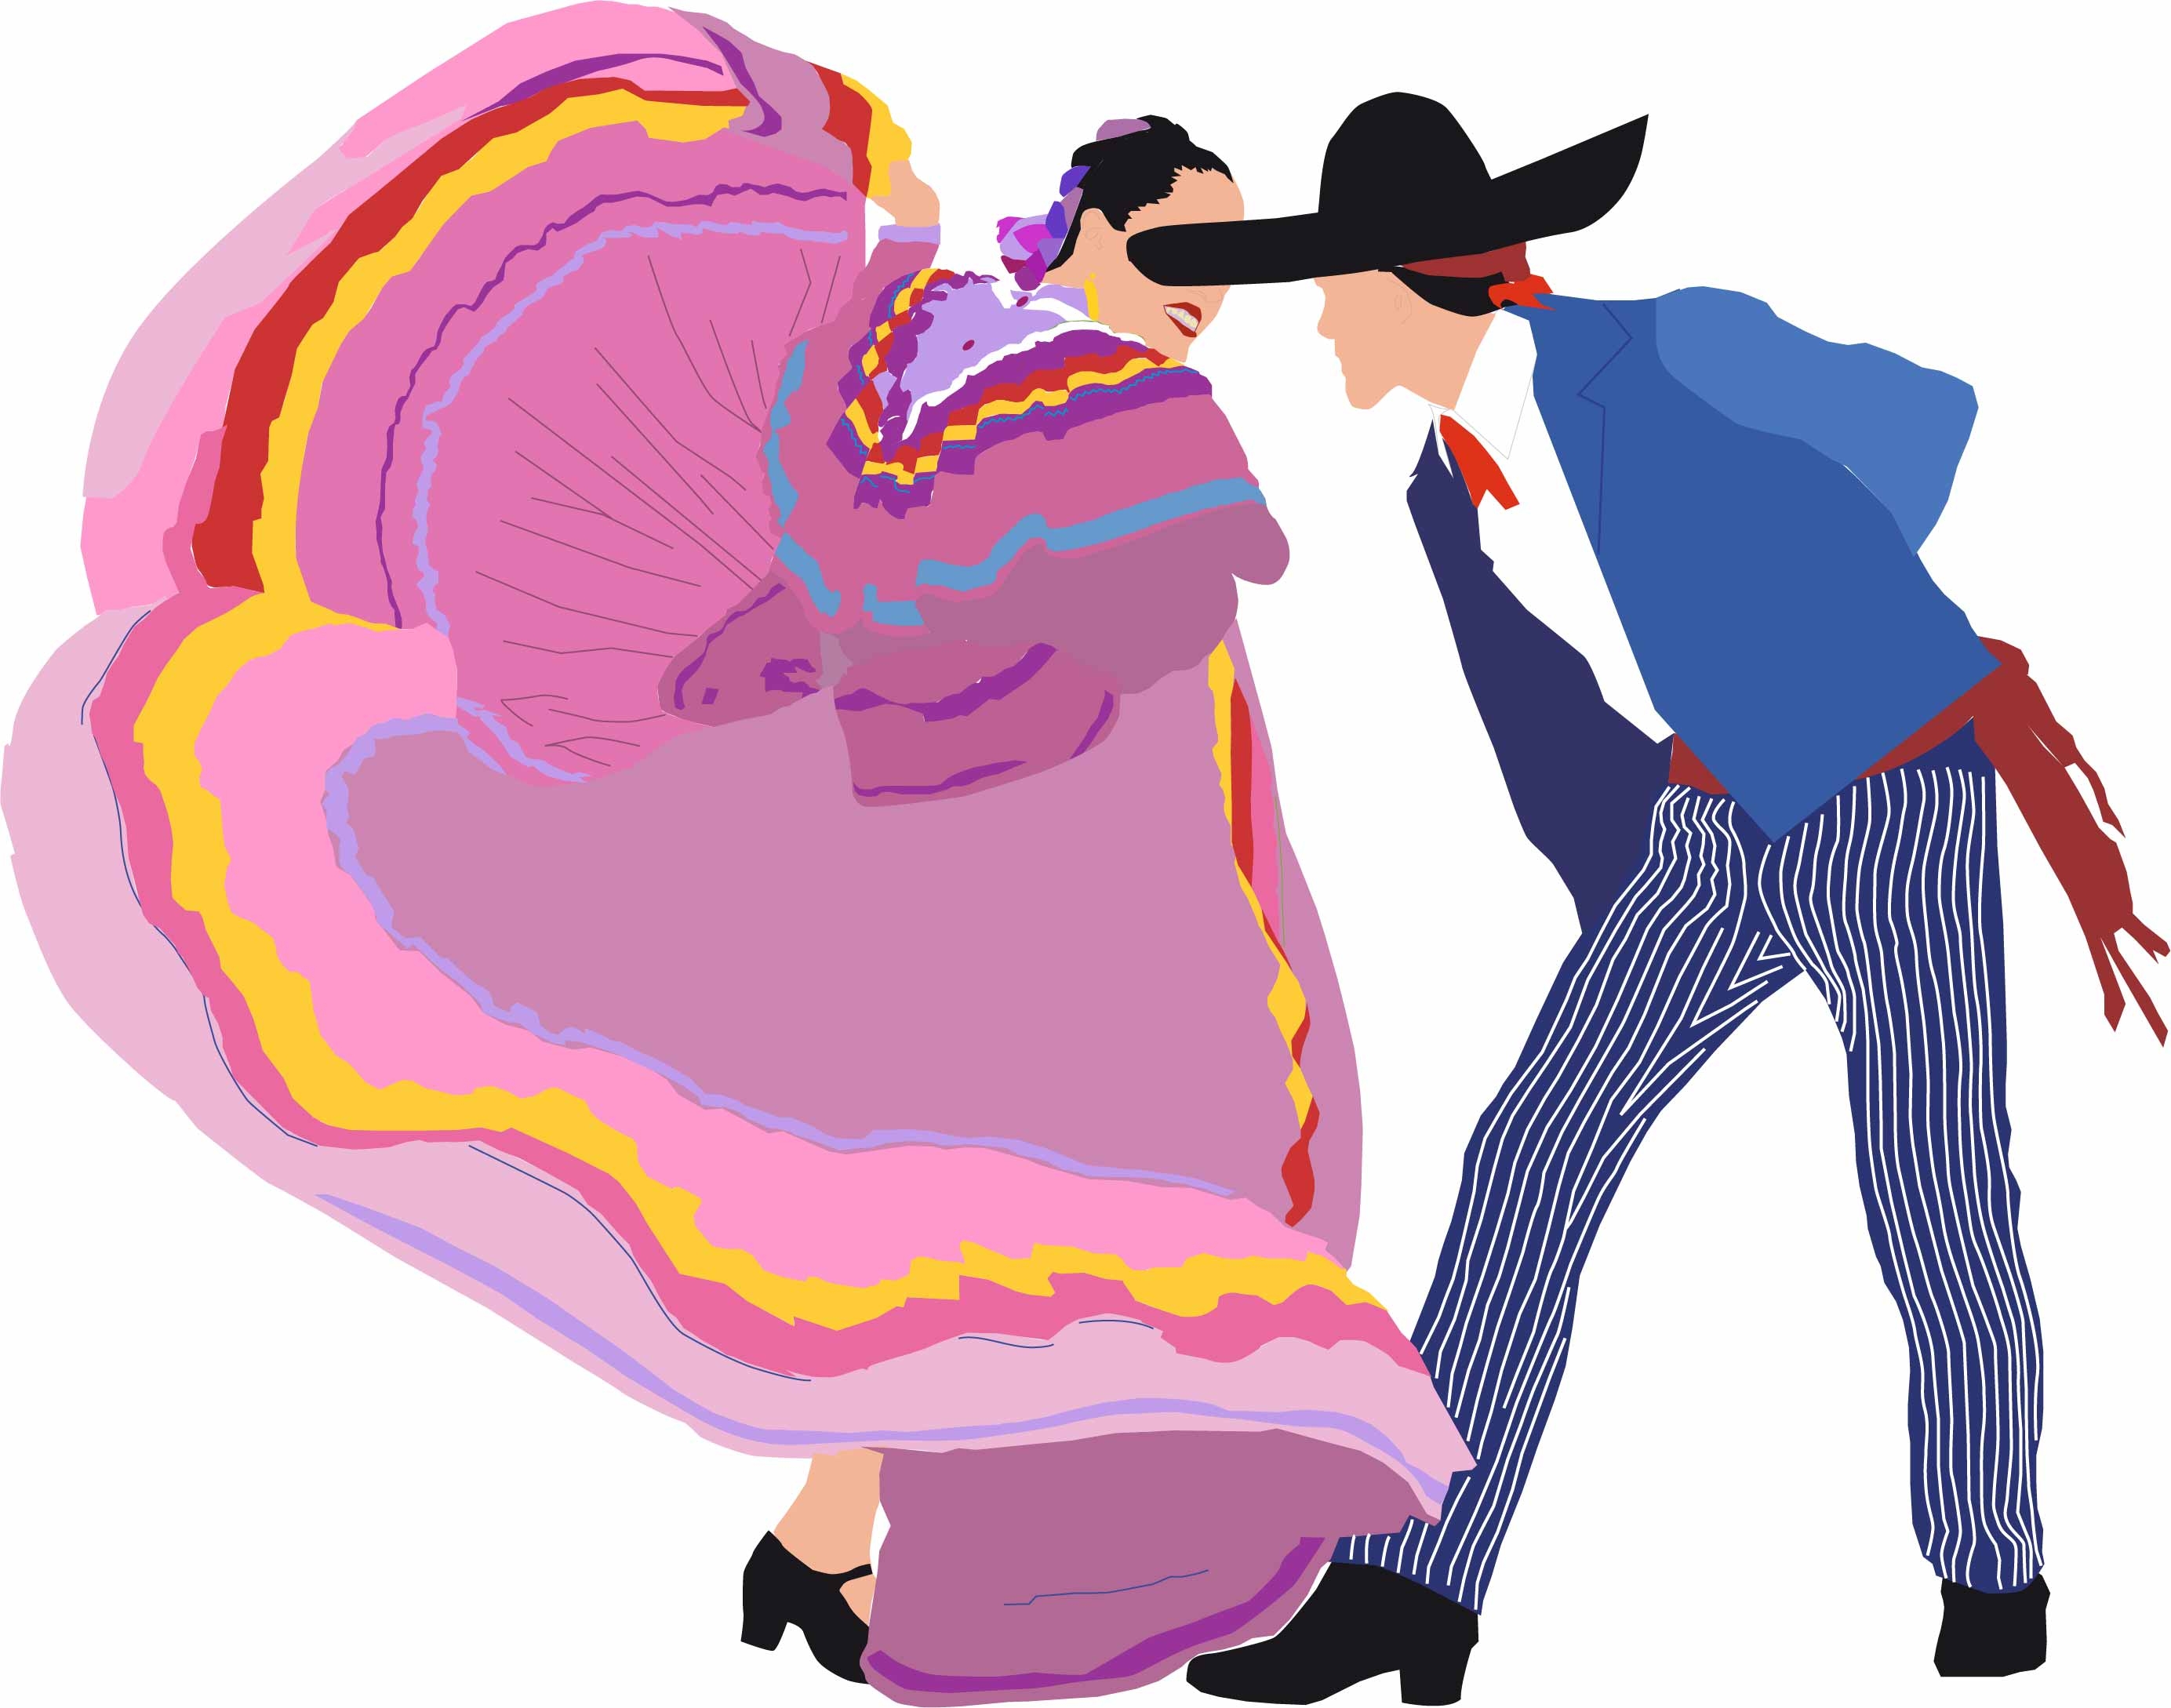 Clip Arts Related To : country style silhouette. view all Country Dance Cli...